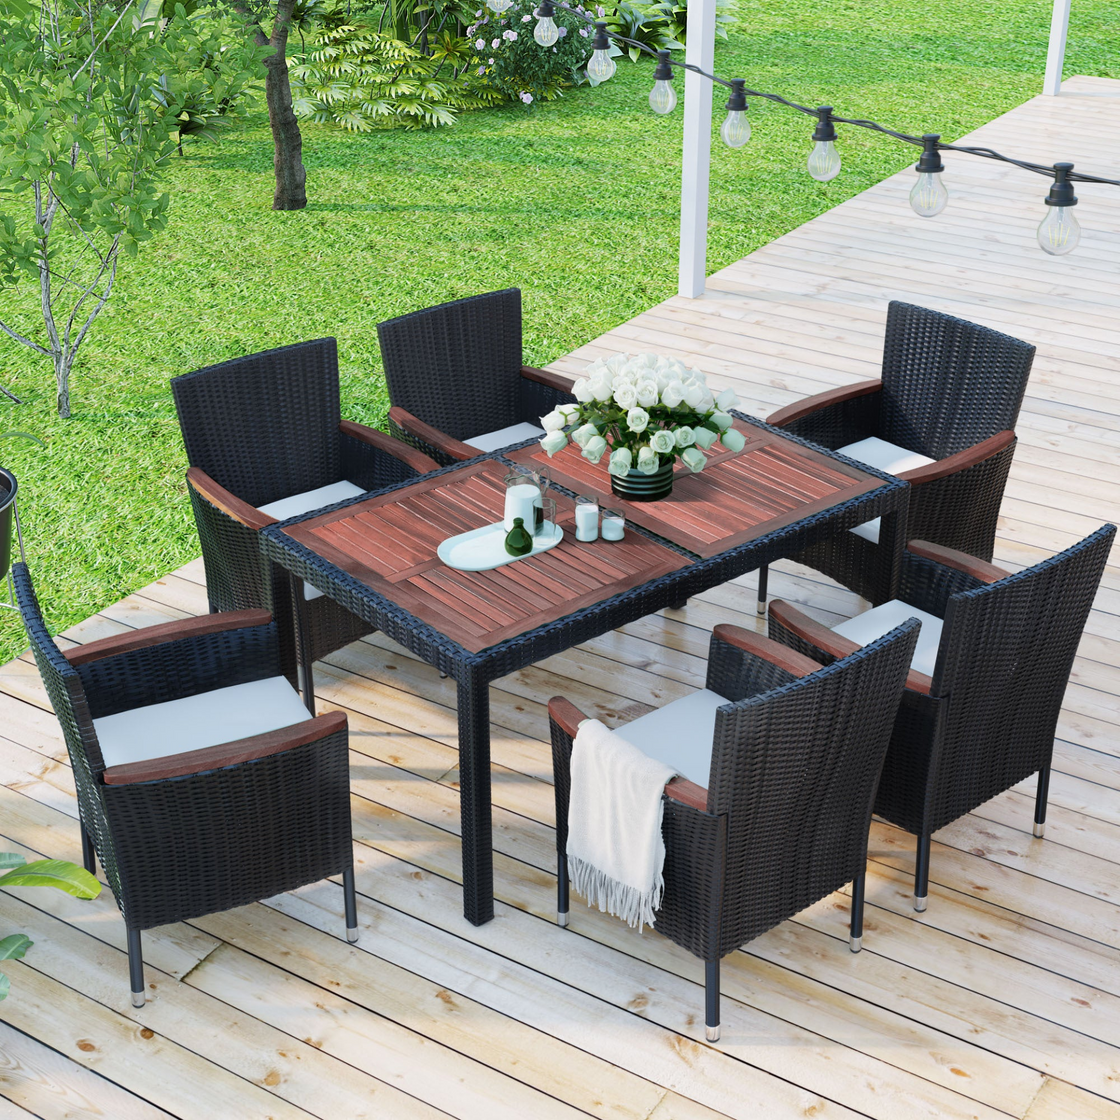 7-Piece Outdoor Patio Dining Set, Garden PE Rattan Wicker Dining Table and Chairs Set, Acacia Wood Tabletop, Stackable Armrest Chairs with Cushions, Reddish-brown